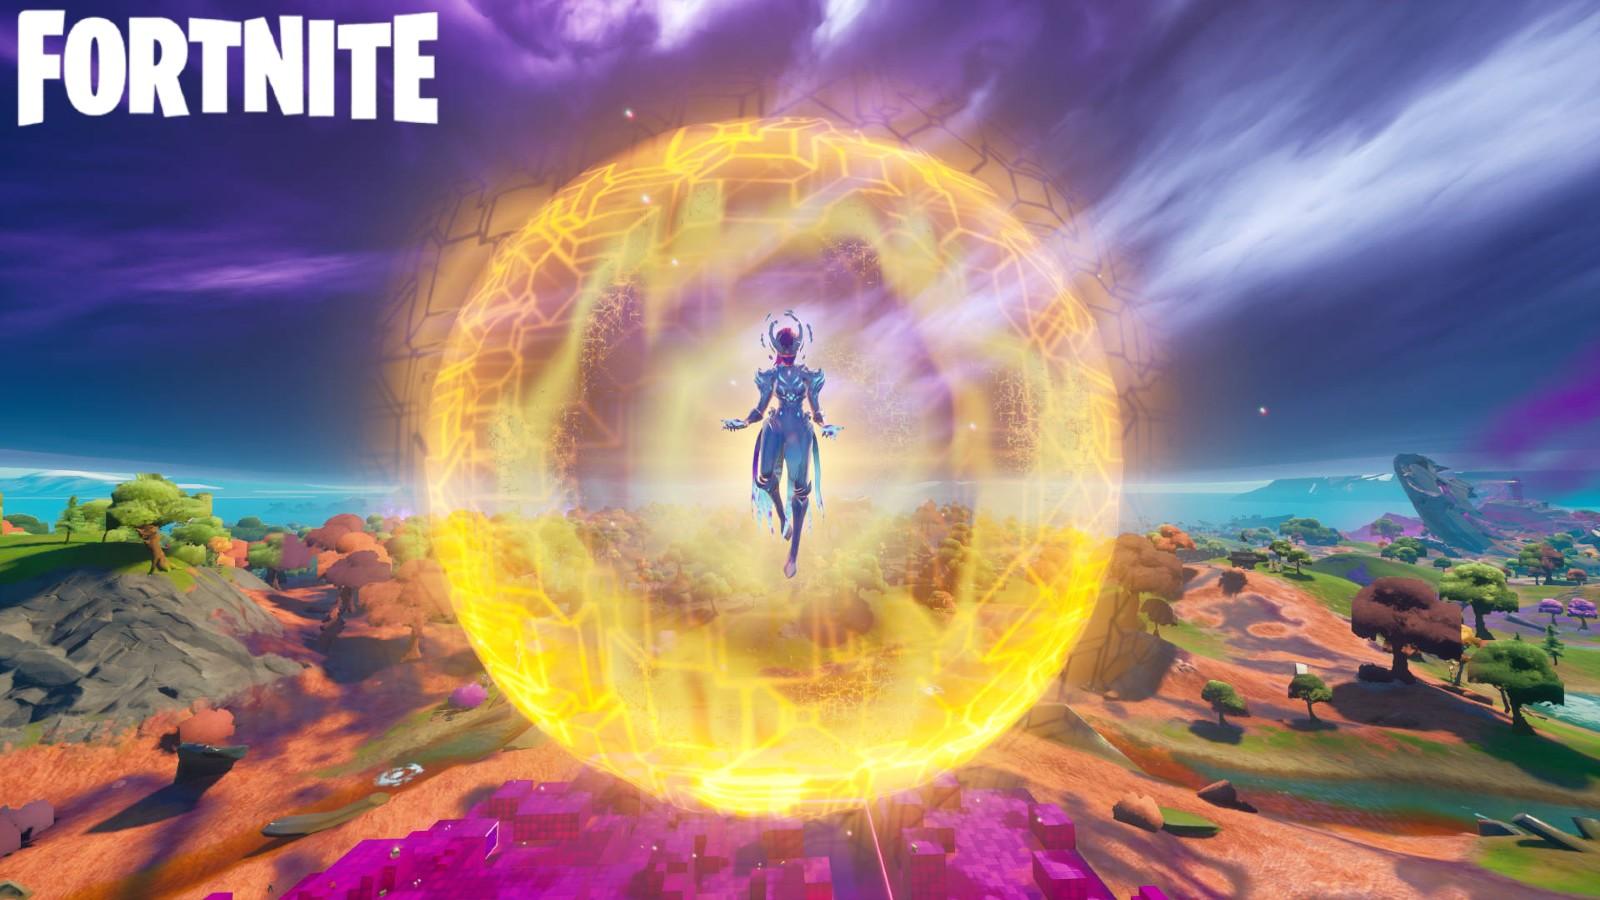 The Cube Queen in Fortnite floats above the island surrounded by a ball of energy